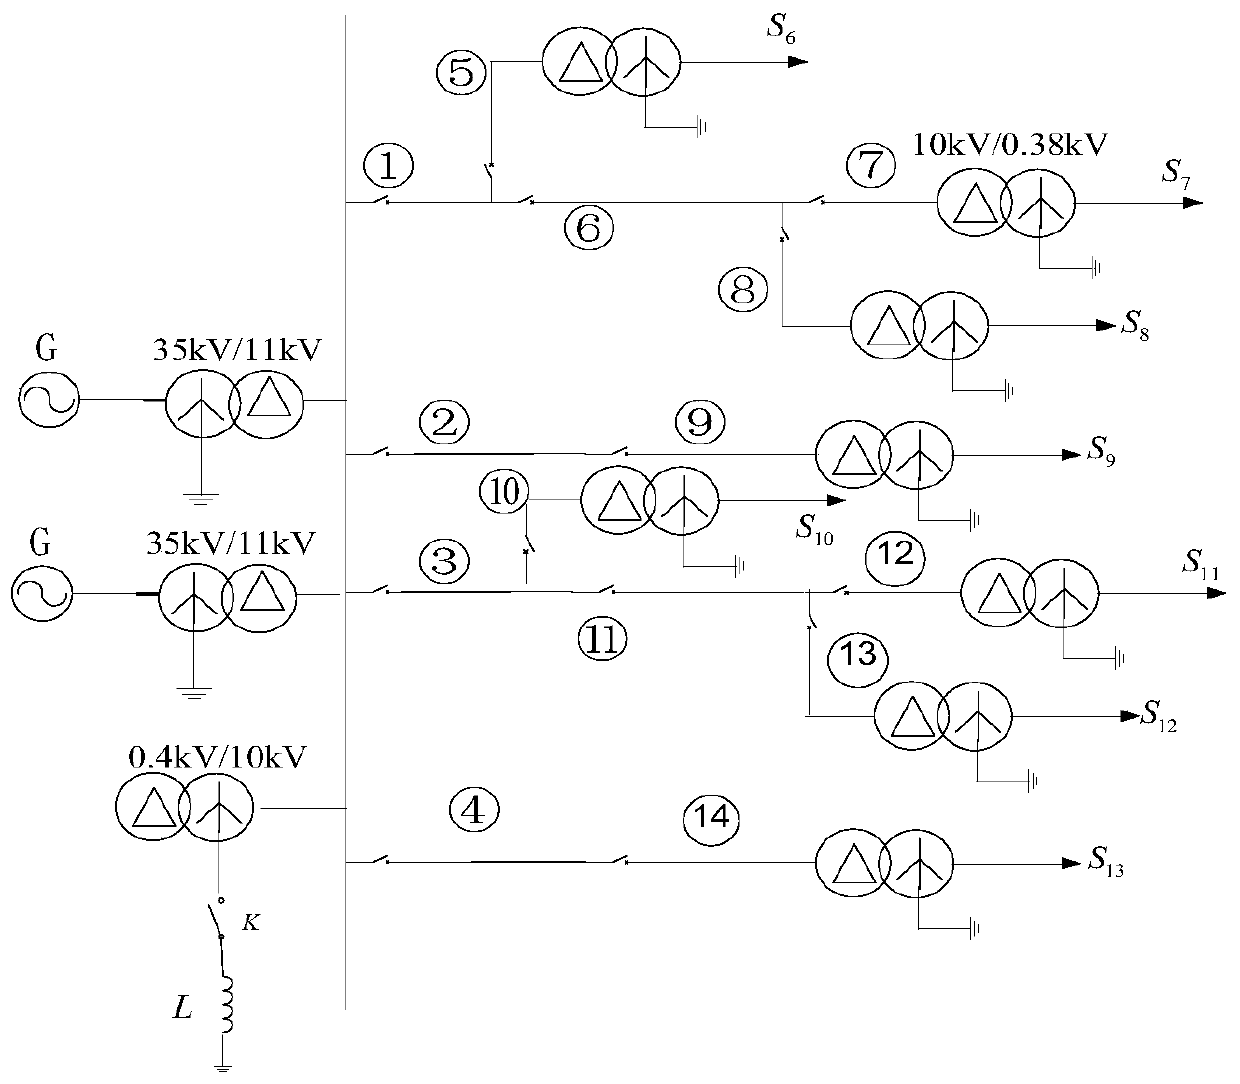 Identification method of single-phase disconnection fault in distribution network based on negative sequence voltage and current characteristics